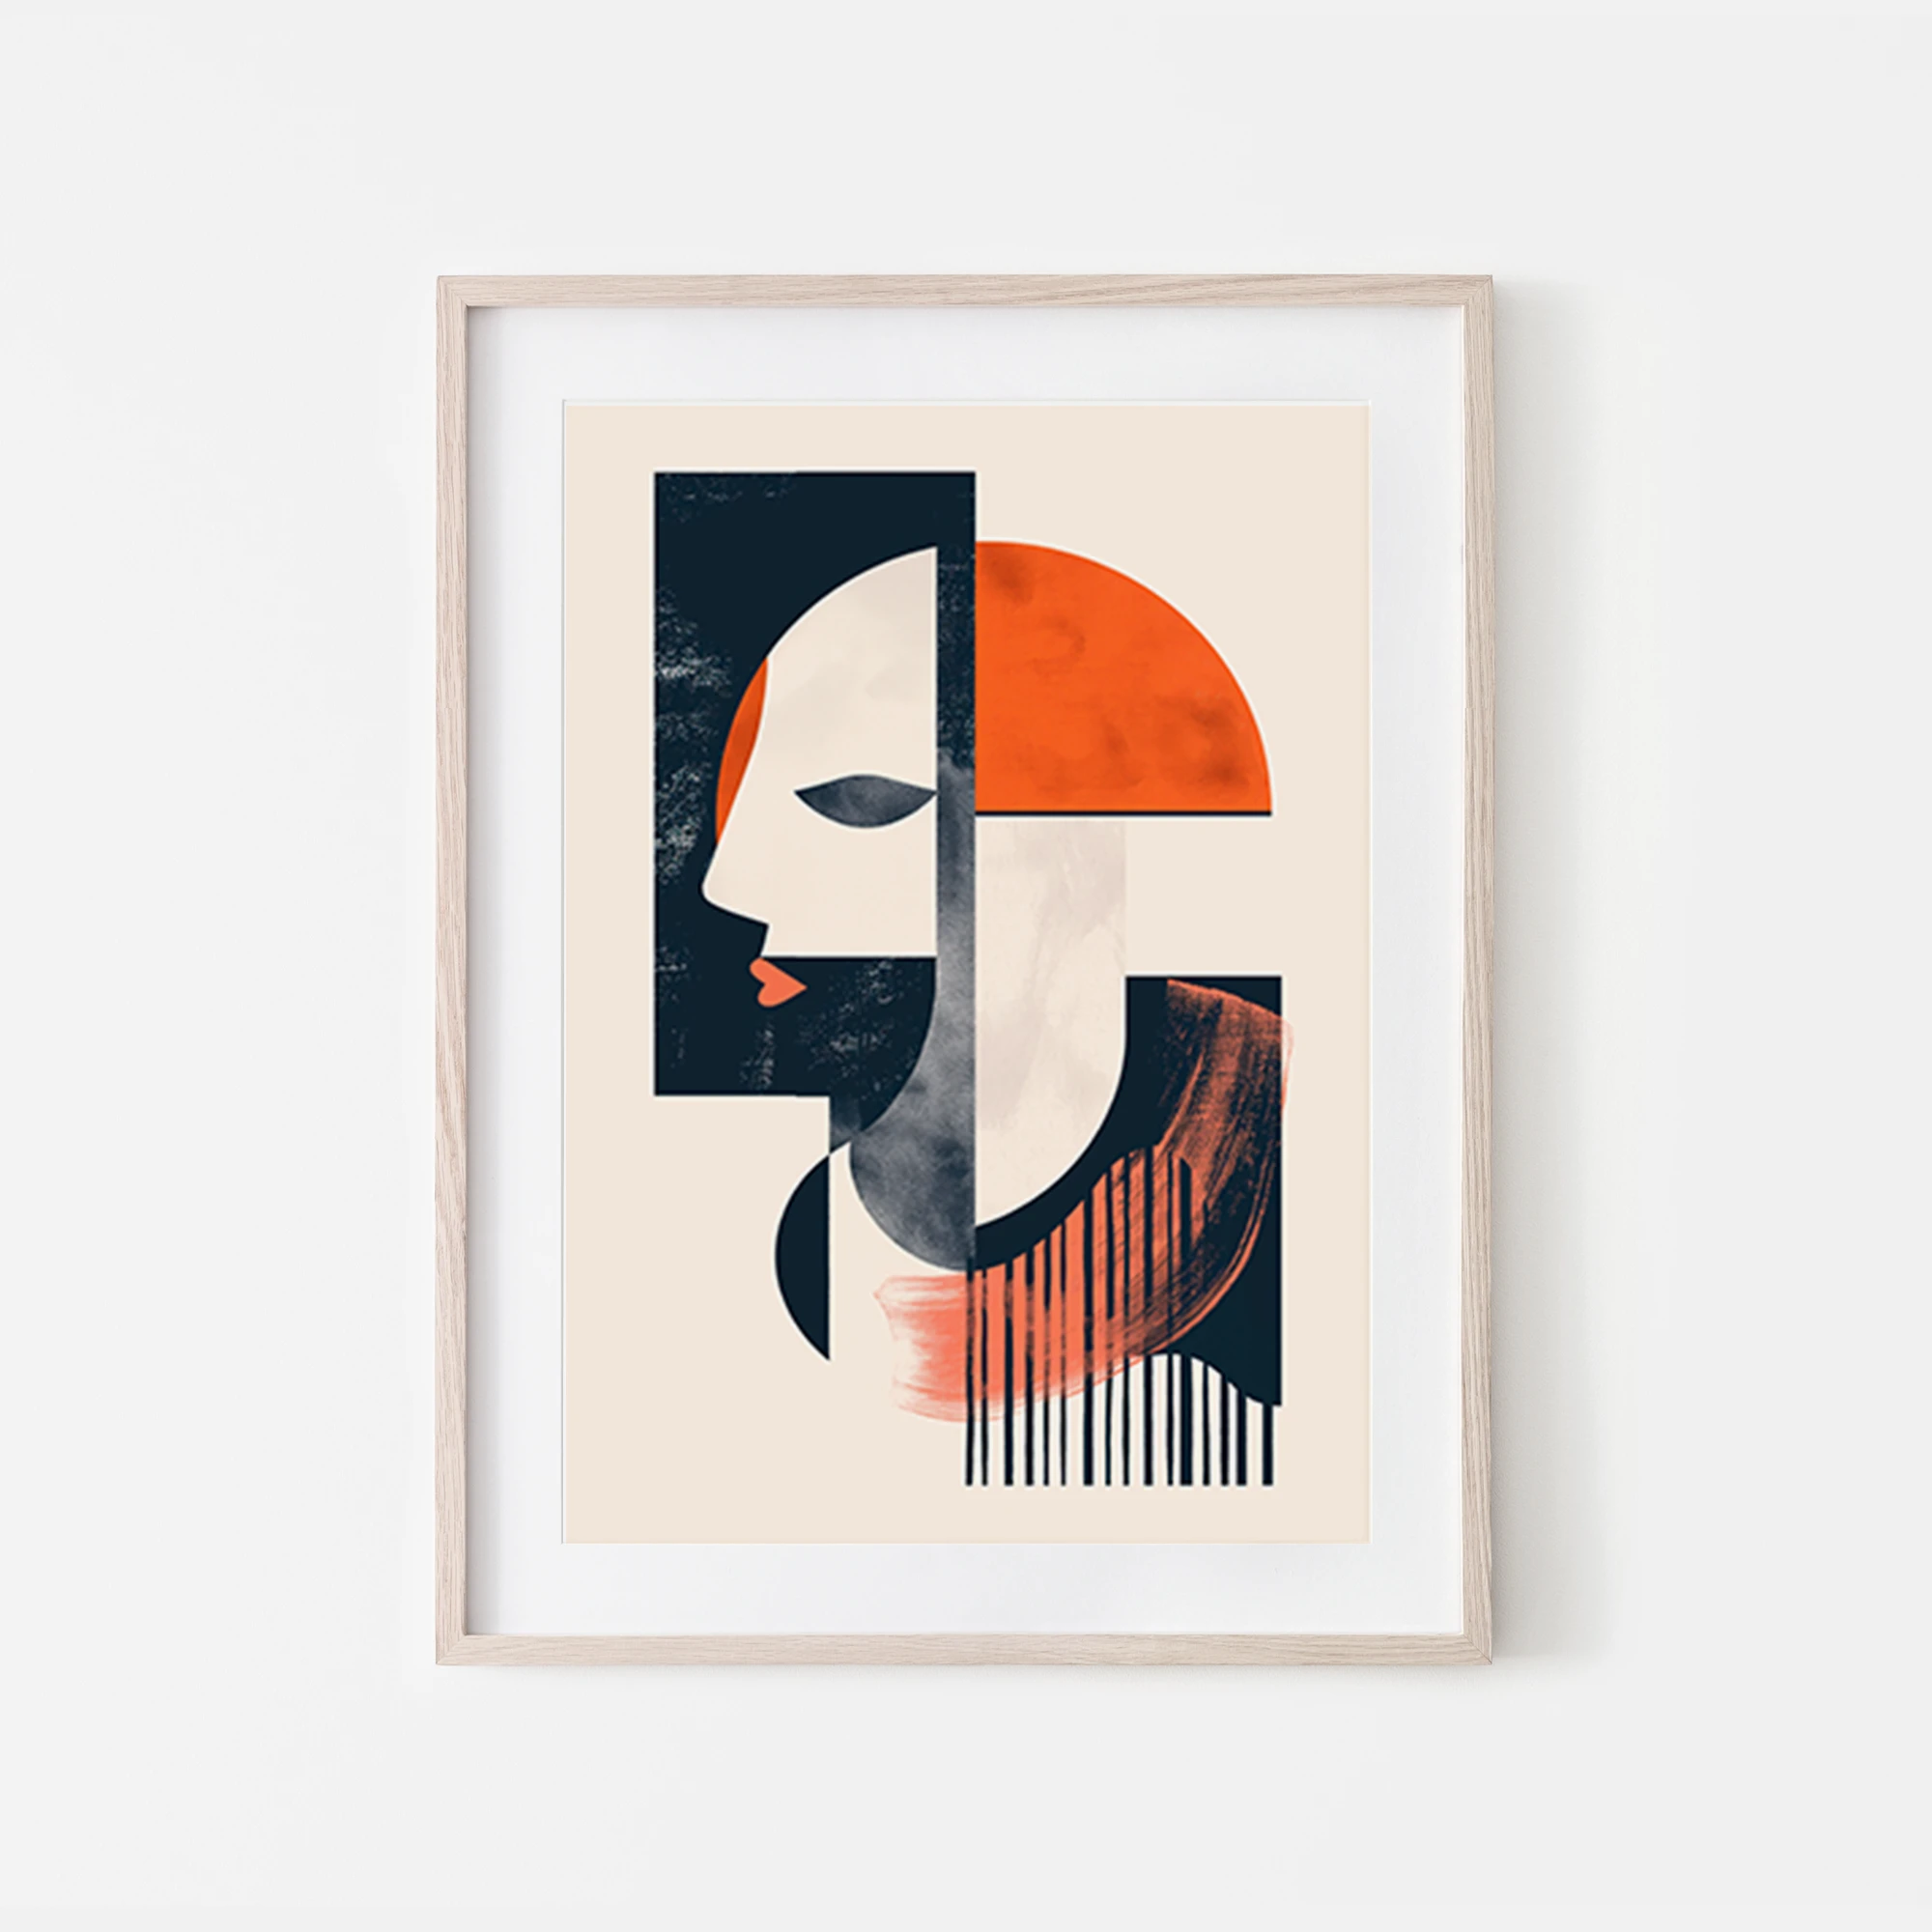 Boho head red lip abstract shapes free art print in red orange and navy